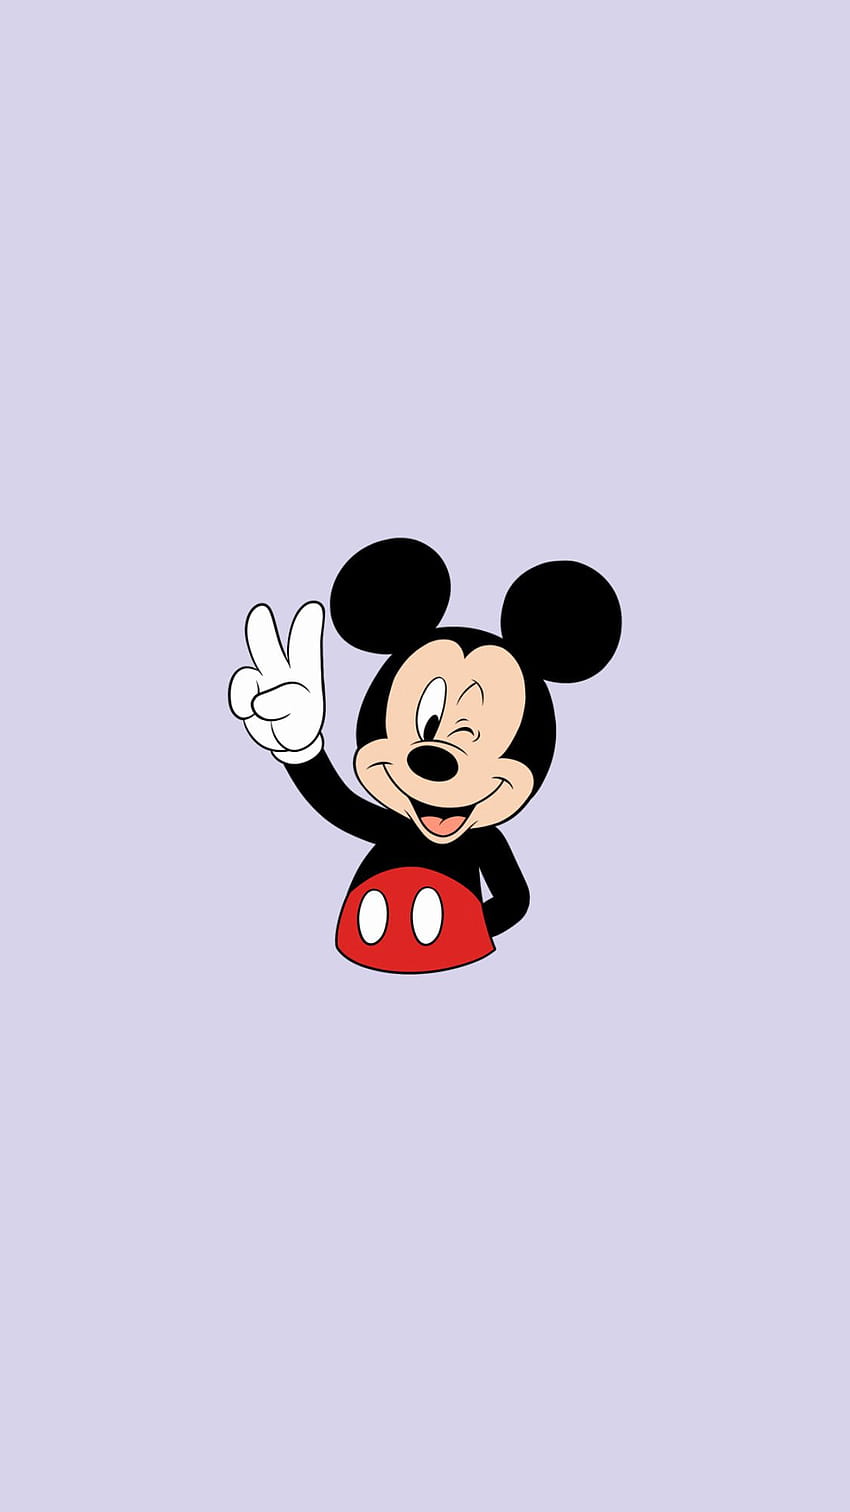 30 Mickey Mouse wallpapers HD  Download Free backgrounds